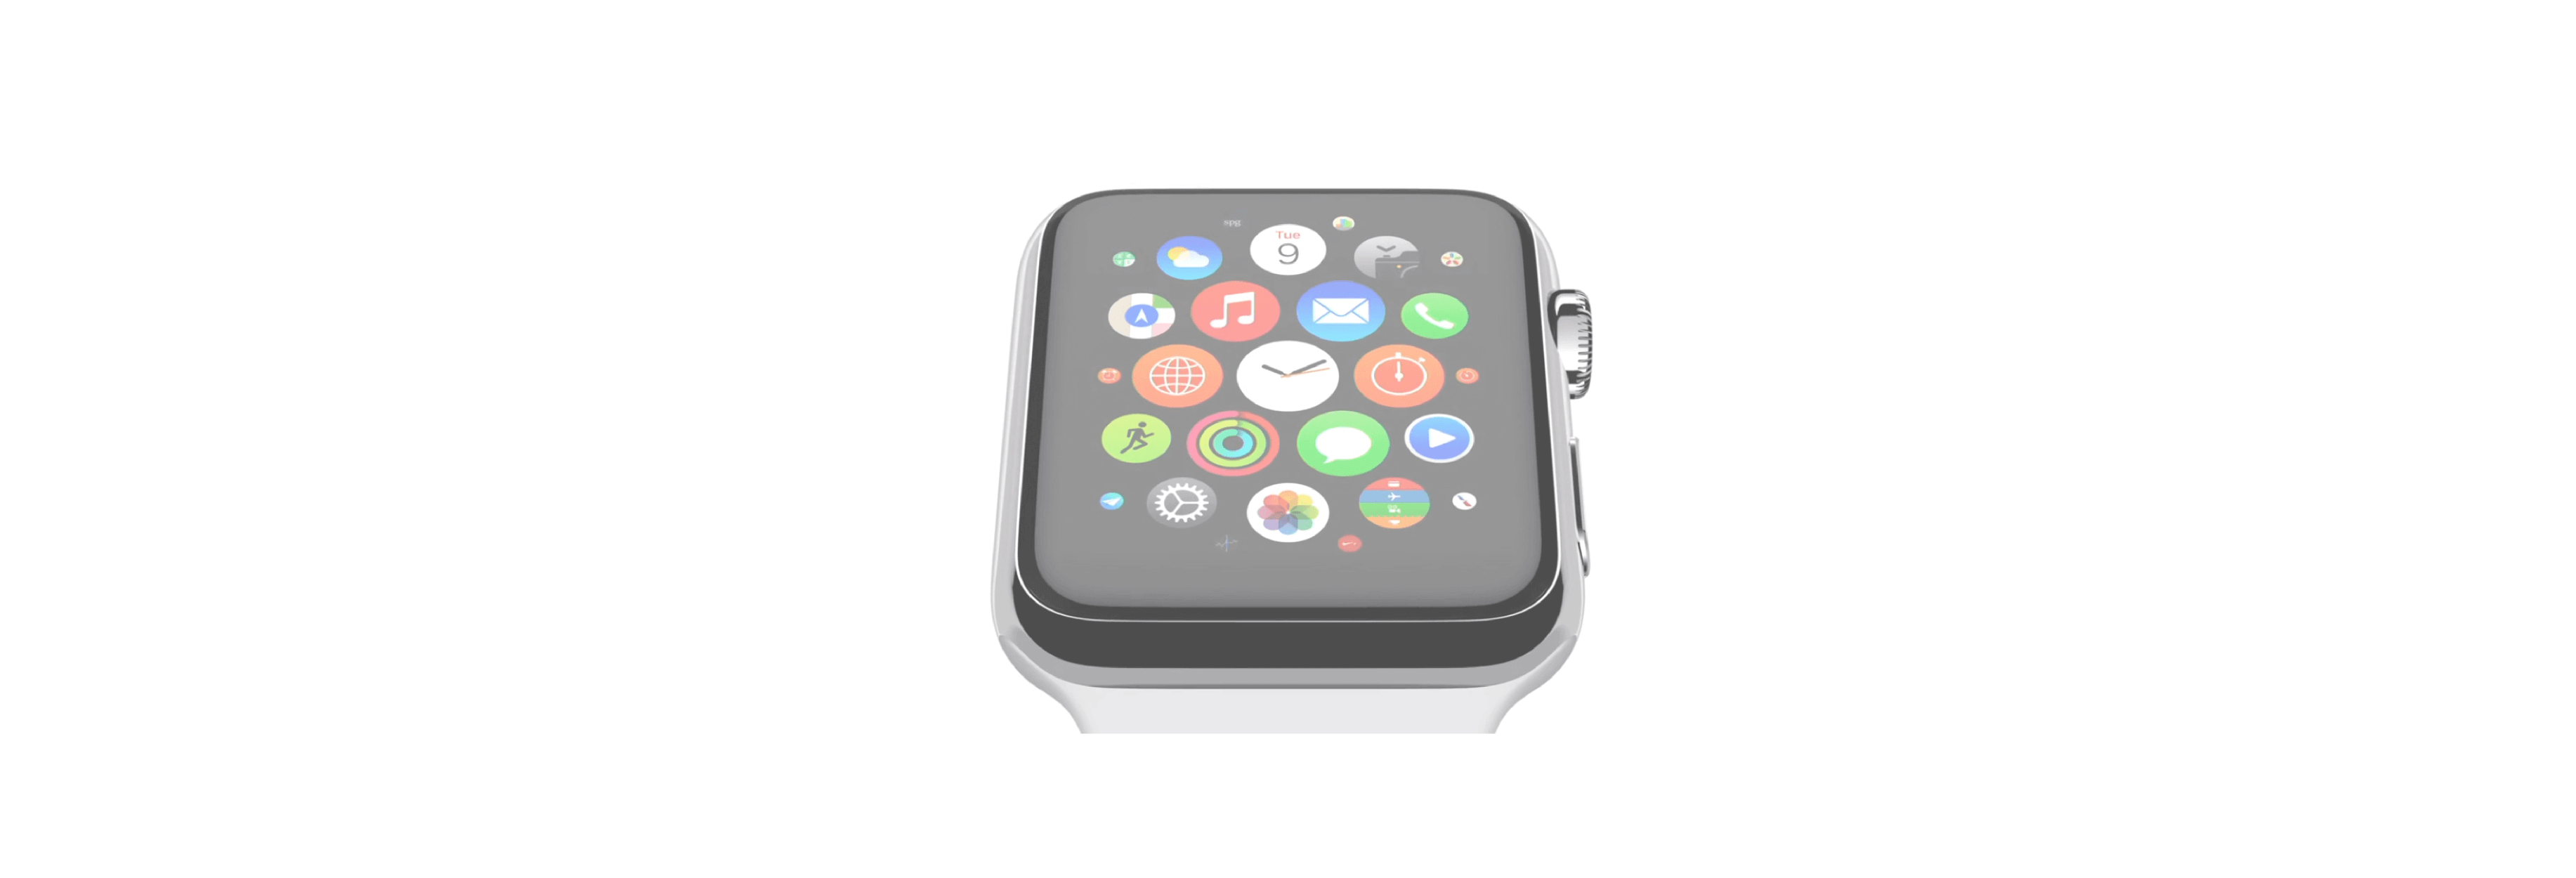 How to use the Dock on your Apple Watch to quickly switch between apps